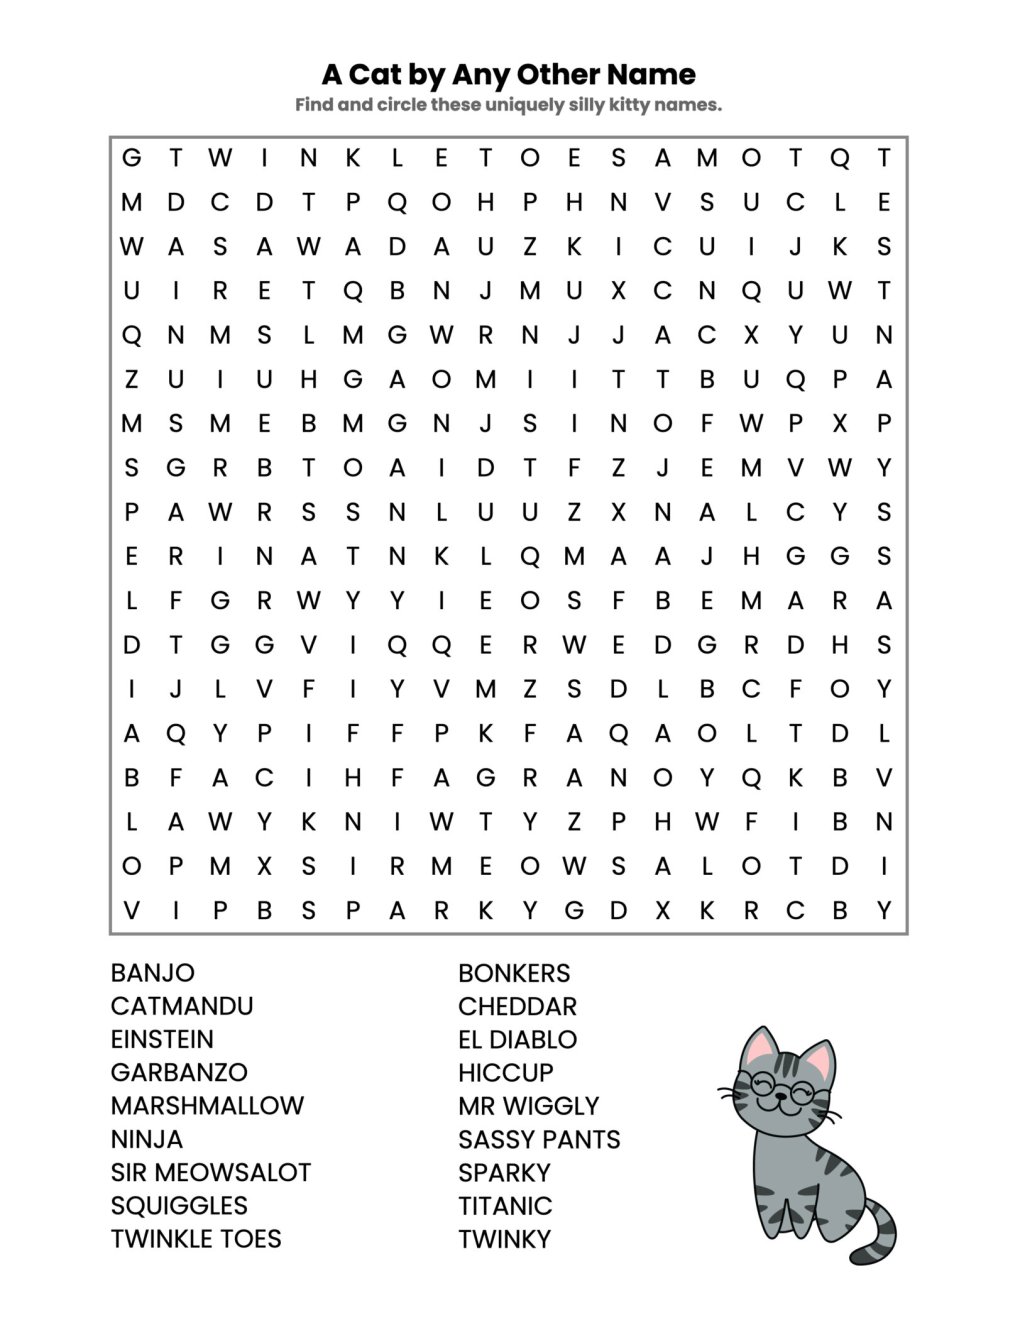 Cat Puzzle Fun: Can You Find All the Feline-Friendly Words in the Grid?